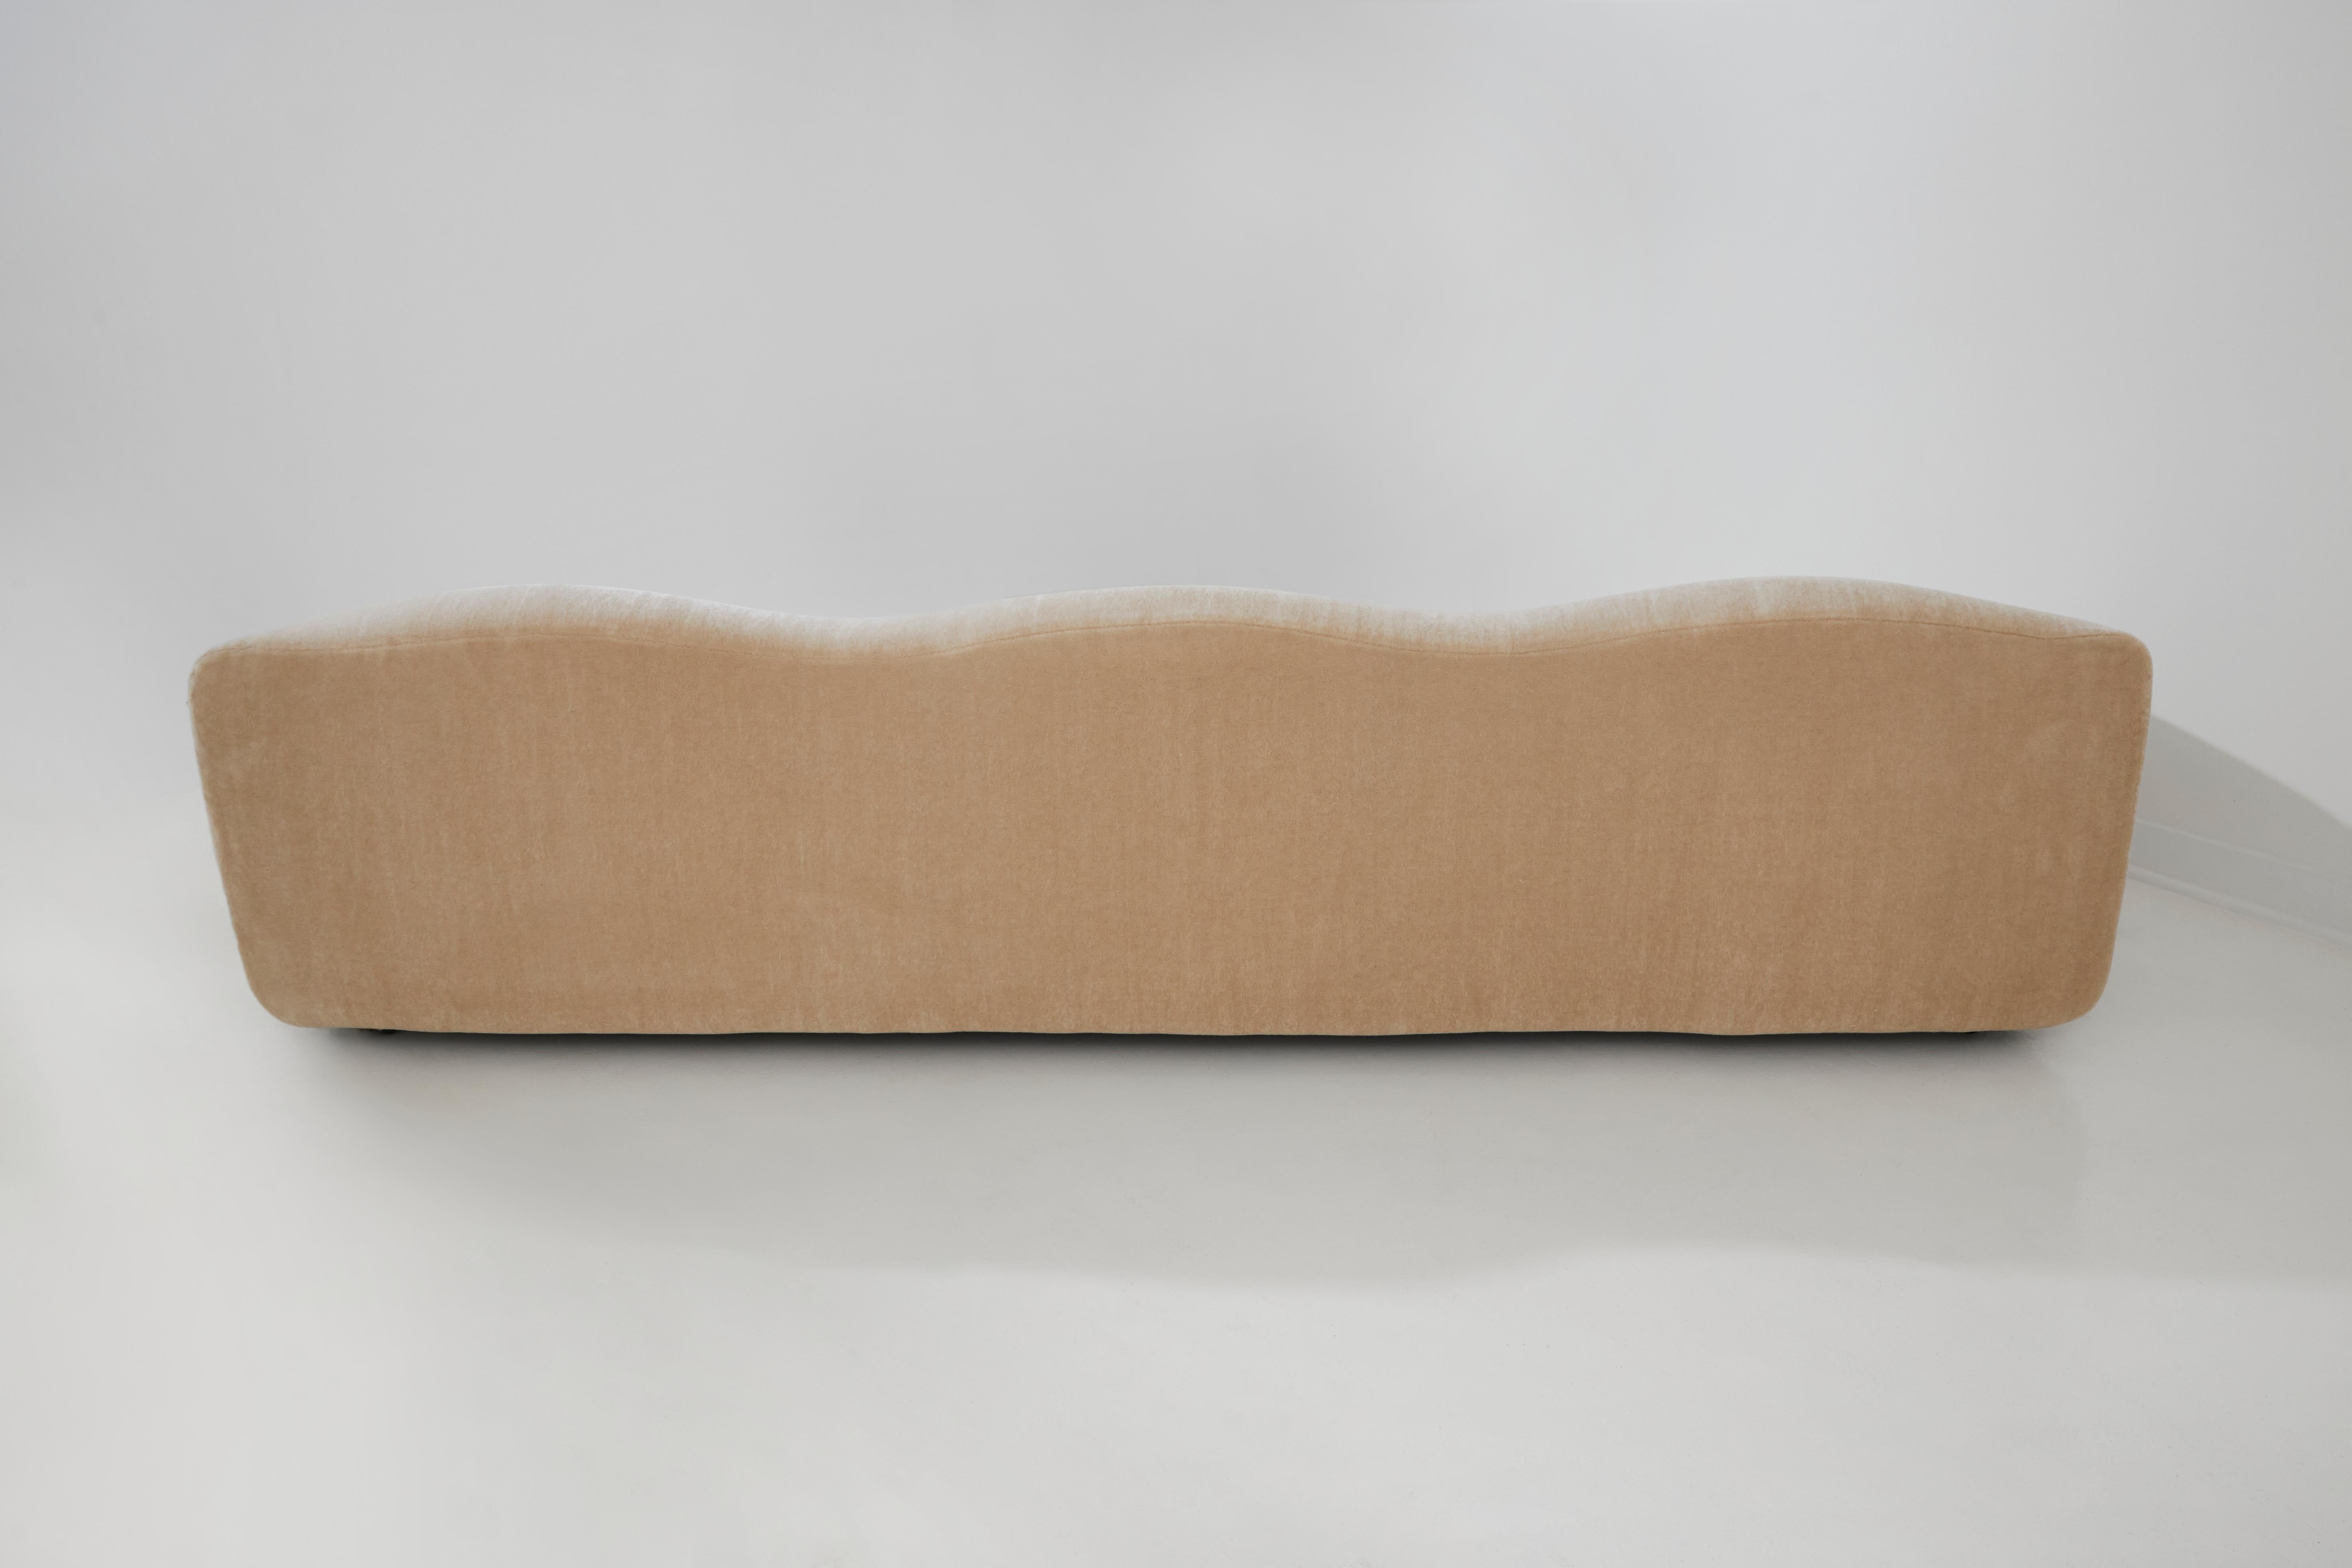 ABCD 3-Seat Sofa by Pierre Paulin for Artifort, Mohair  In Excellent Condition For Sale In Toronto, ON